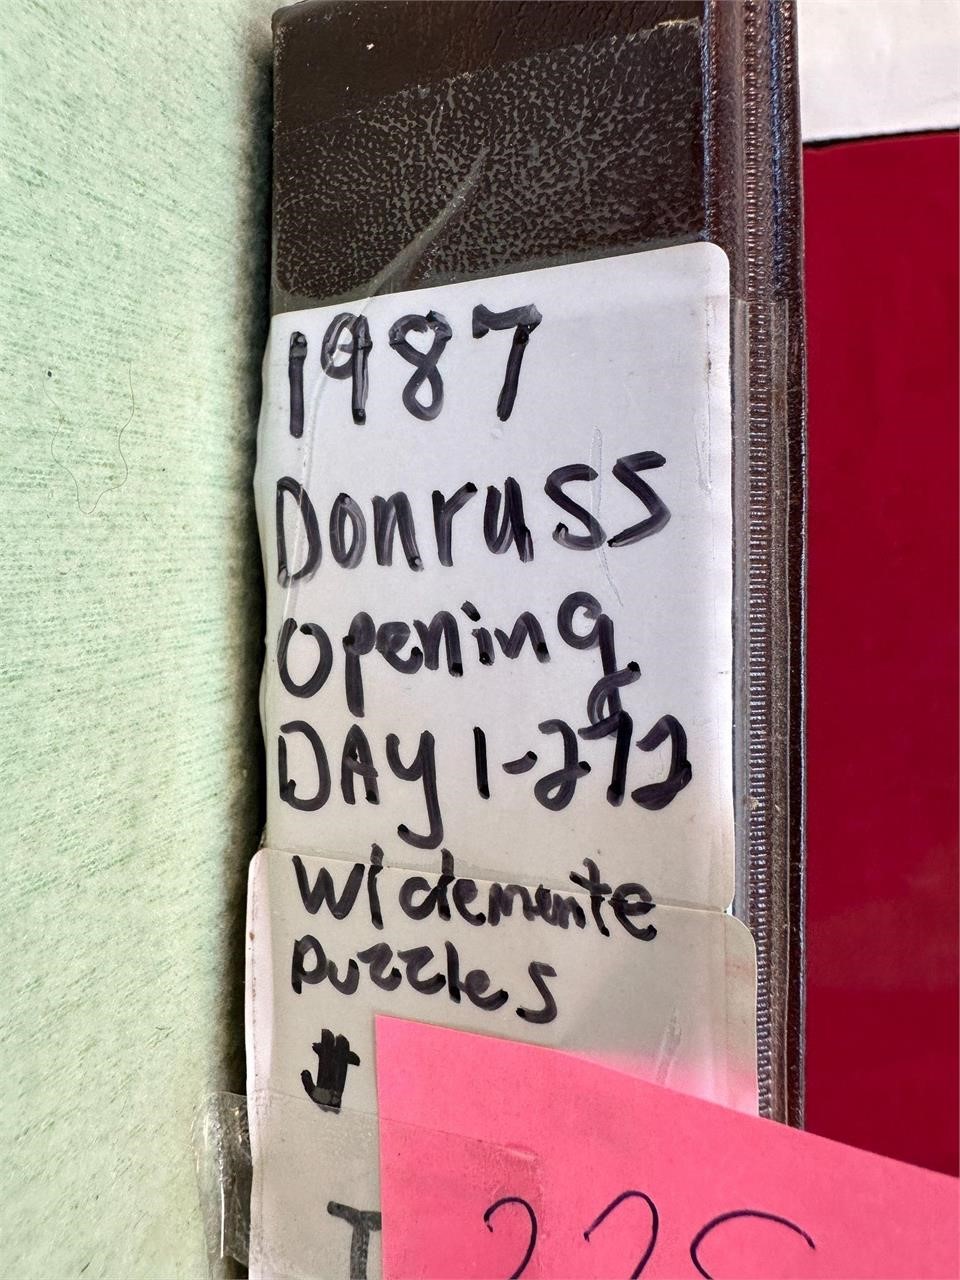 1987 DONRUSS OPENING DAY 1-272 W/CLEMENTE PUZZLES